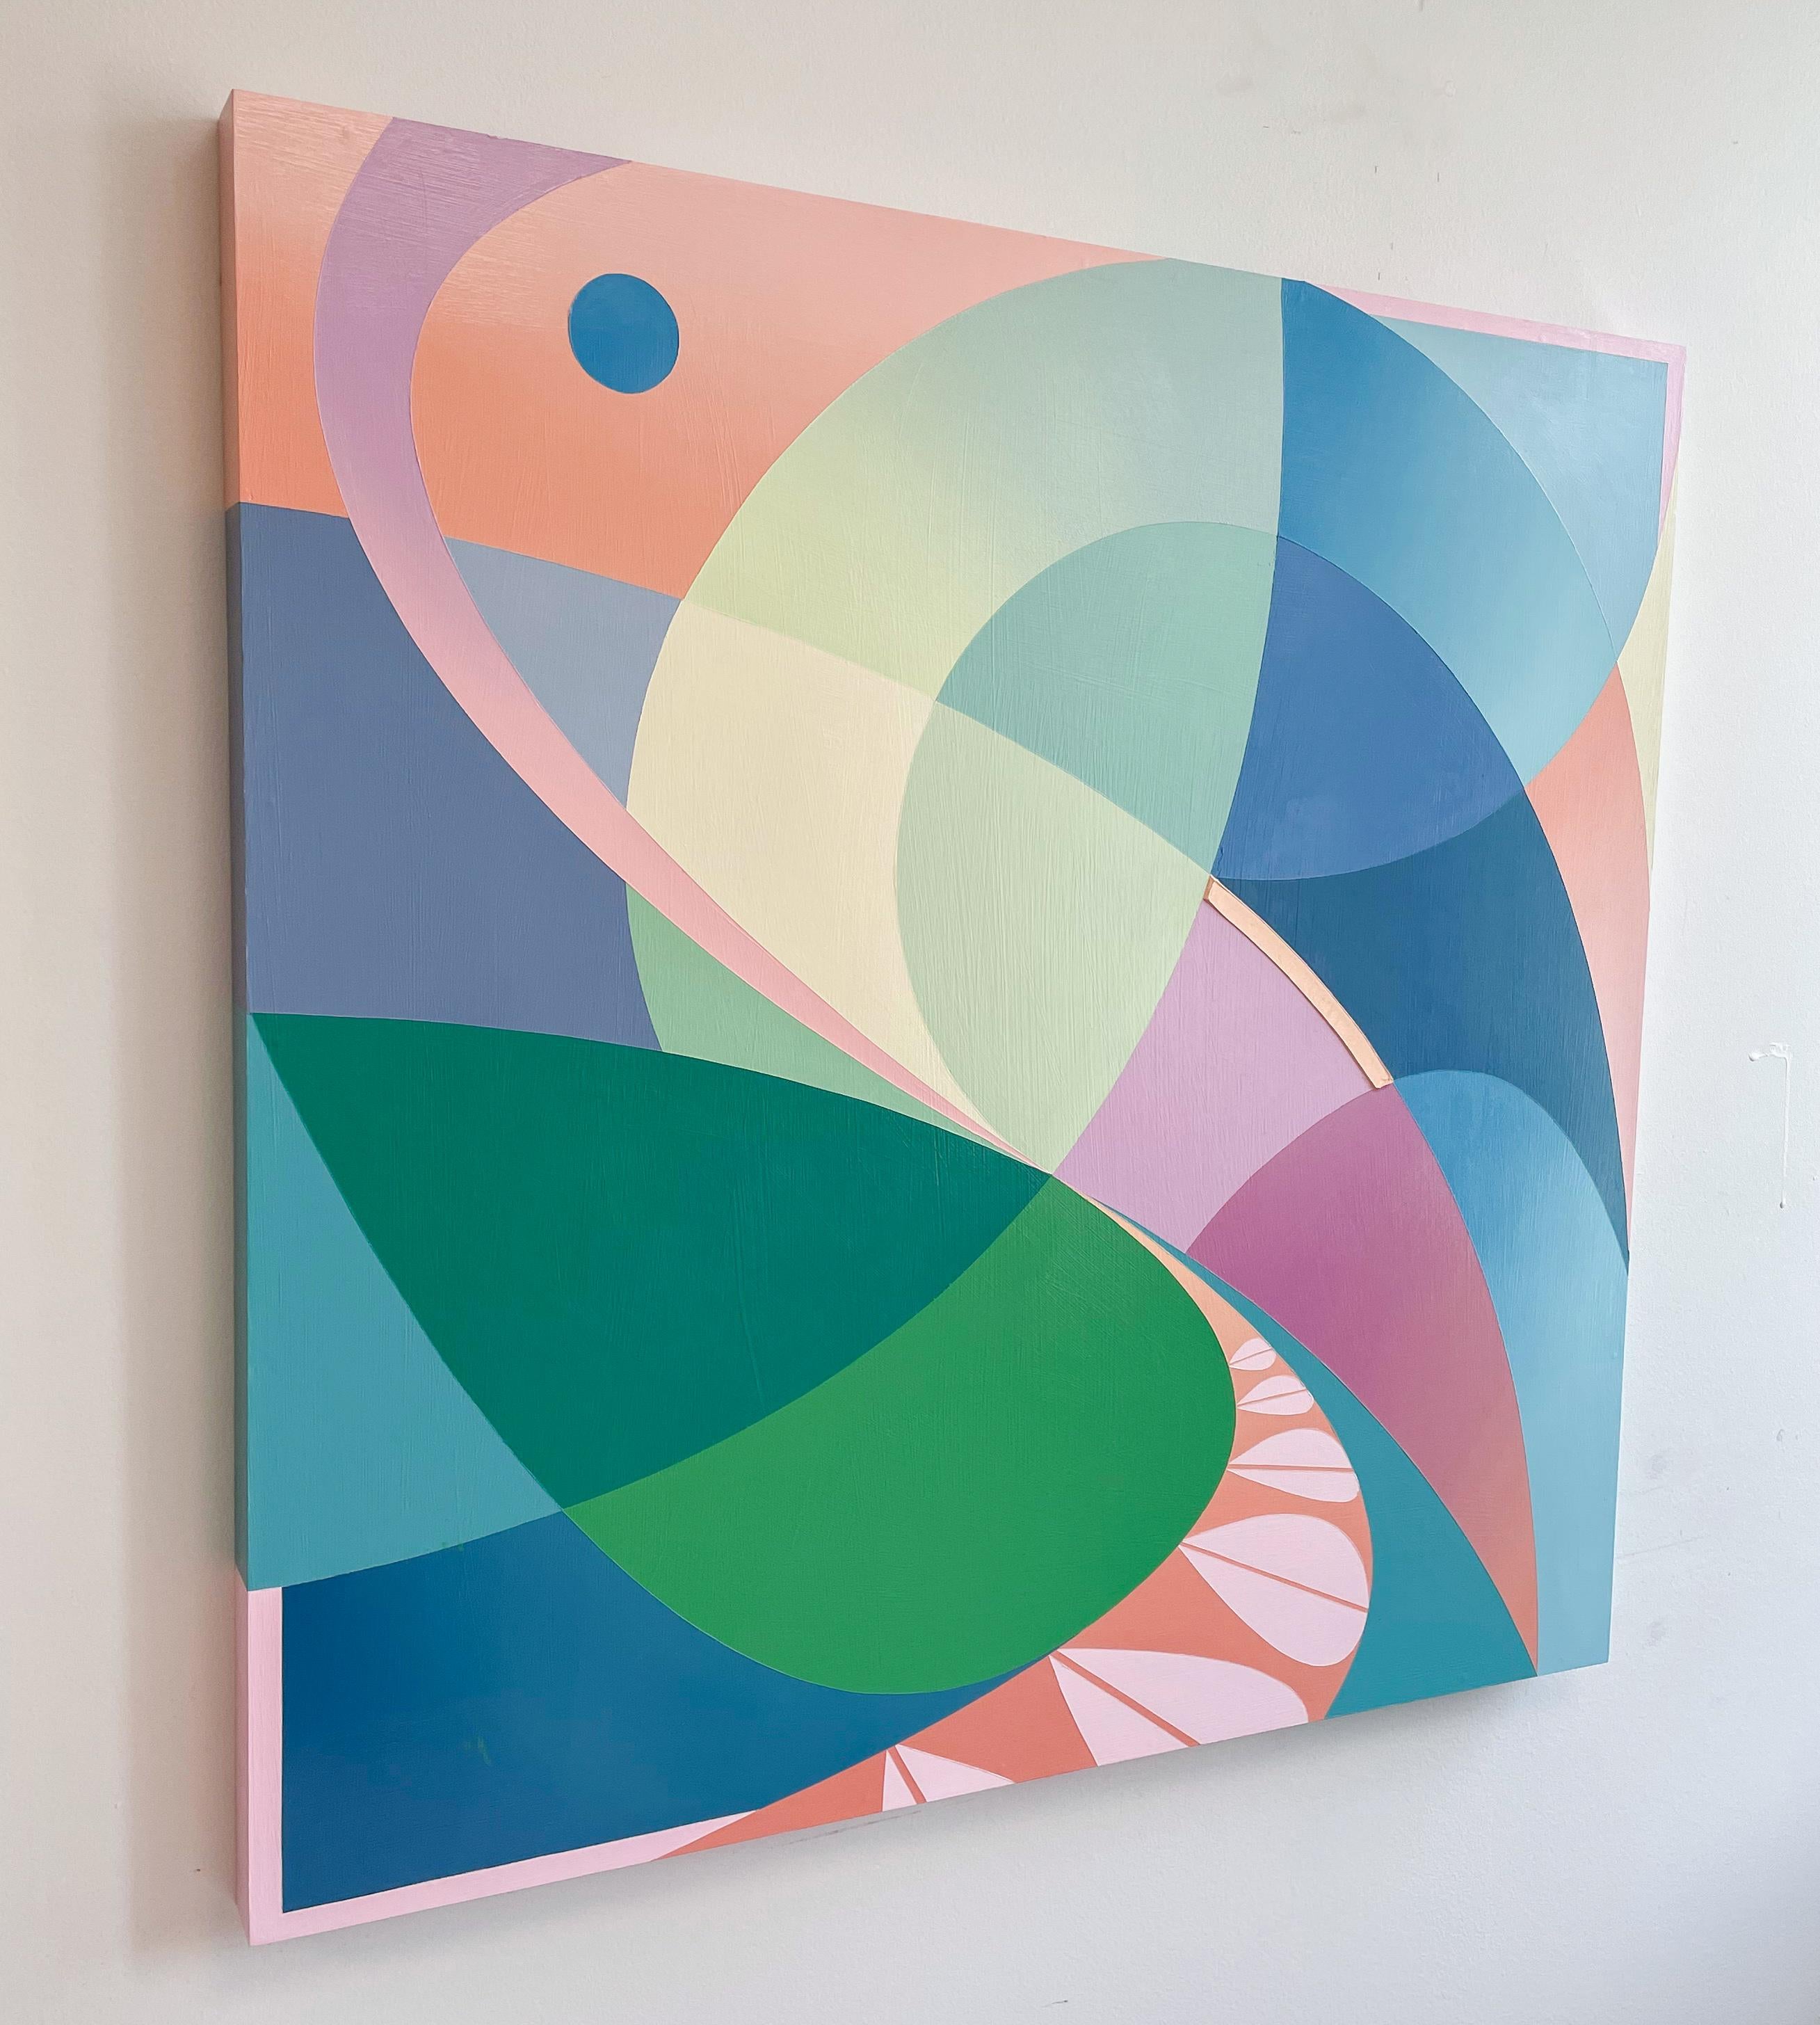 In this work, Michelle Weddle utilizes line, color, and form to create a painting which acts at the balance between the nonobjective and representational. Using darker, more varied colors with looping, seedlike shapes, she expresses an experience of